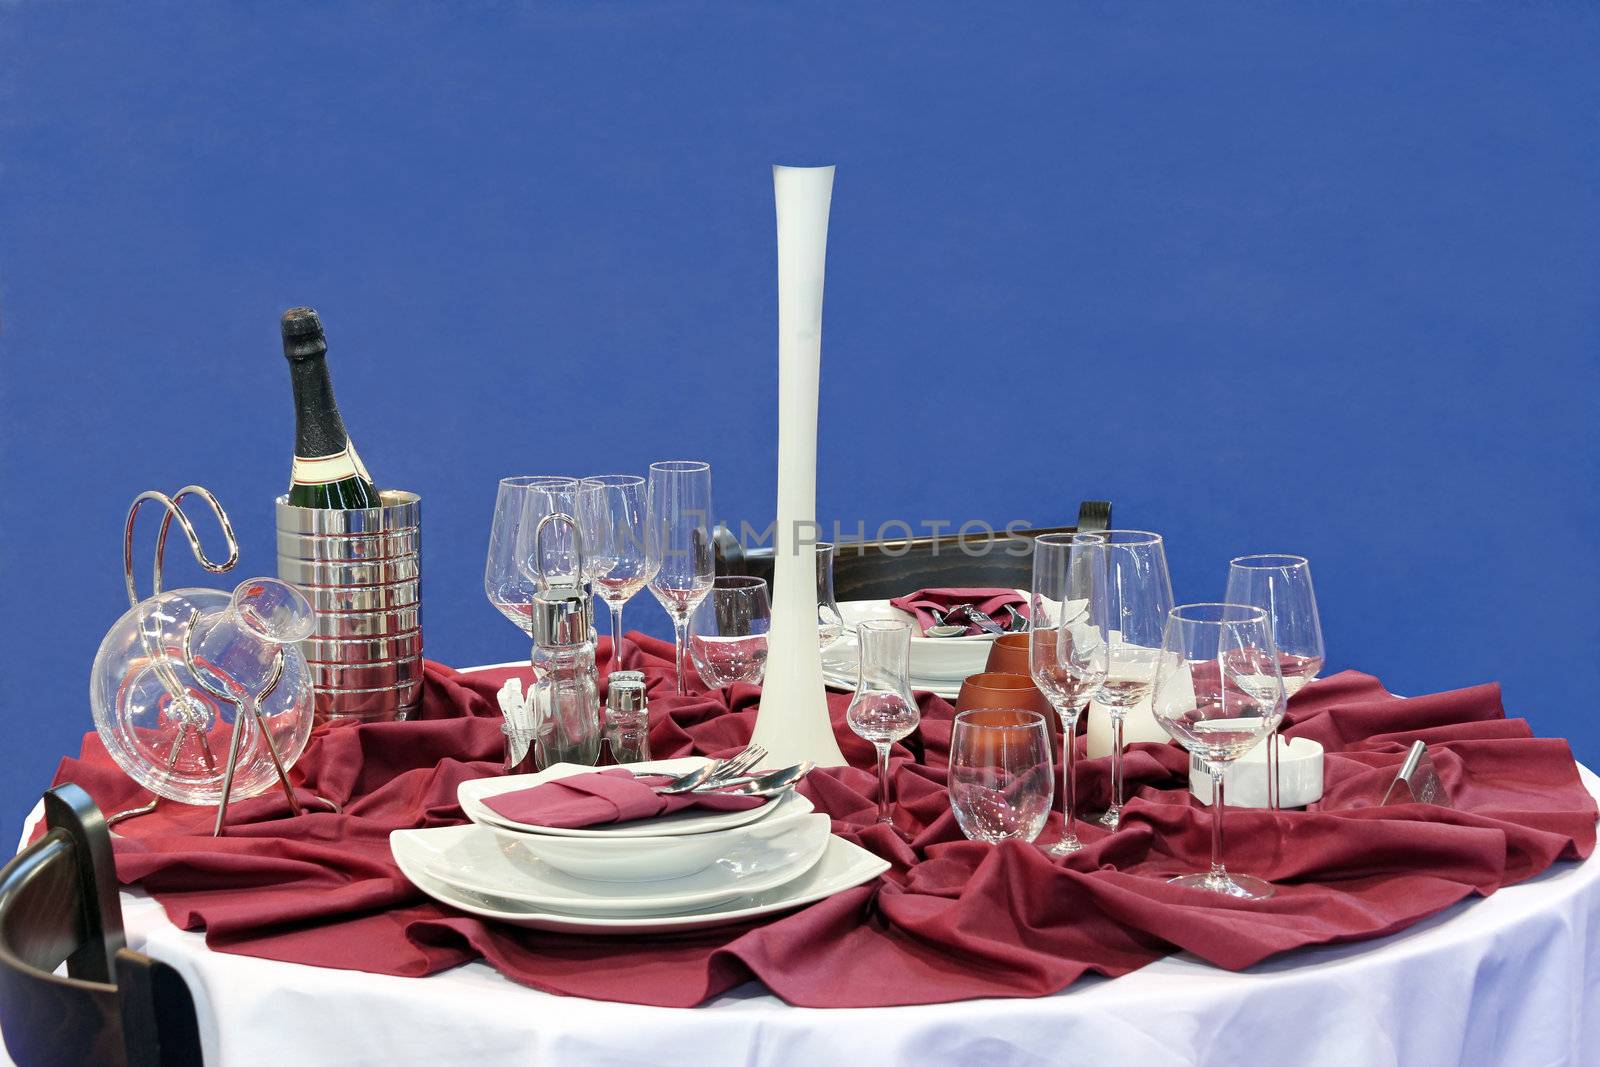 glasses and dinner service by goce